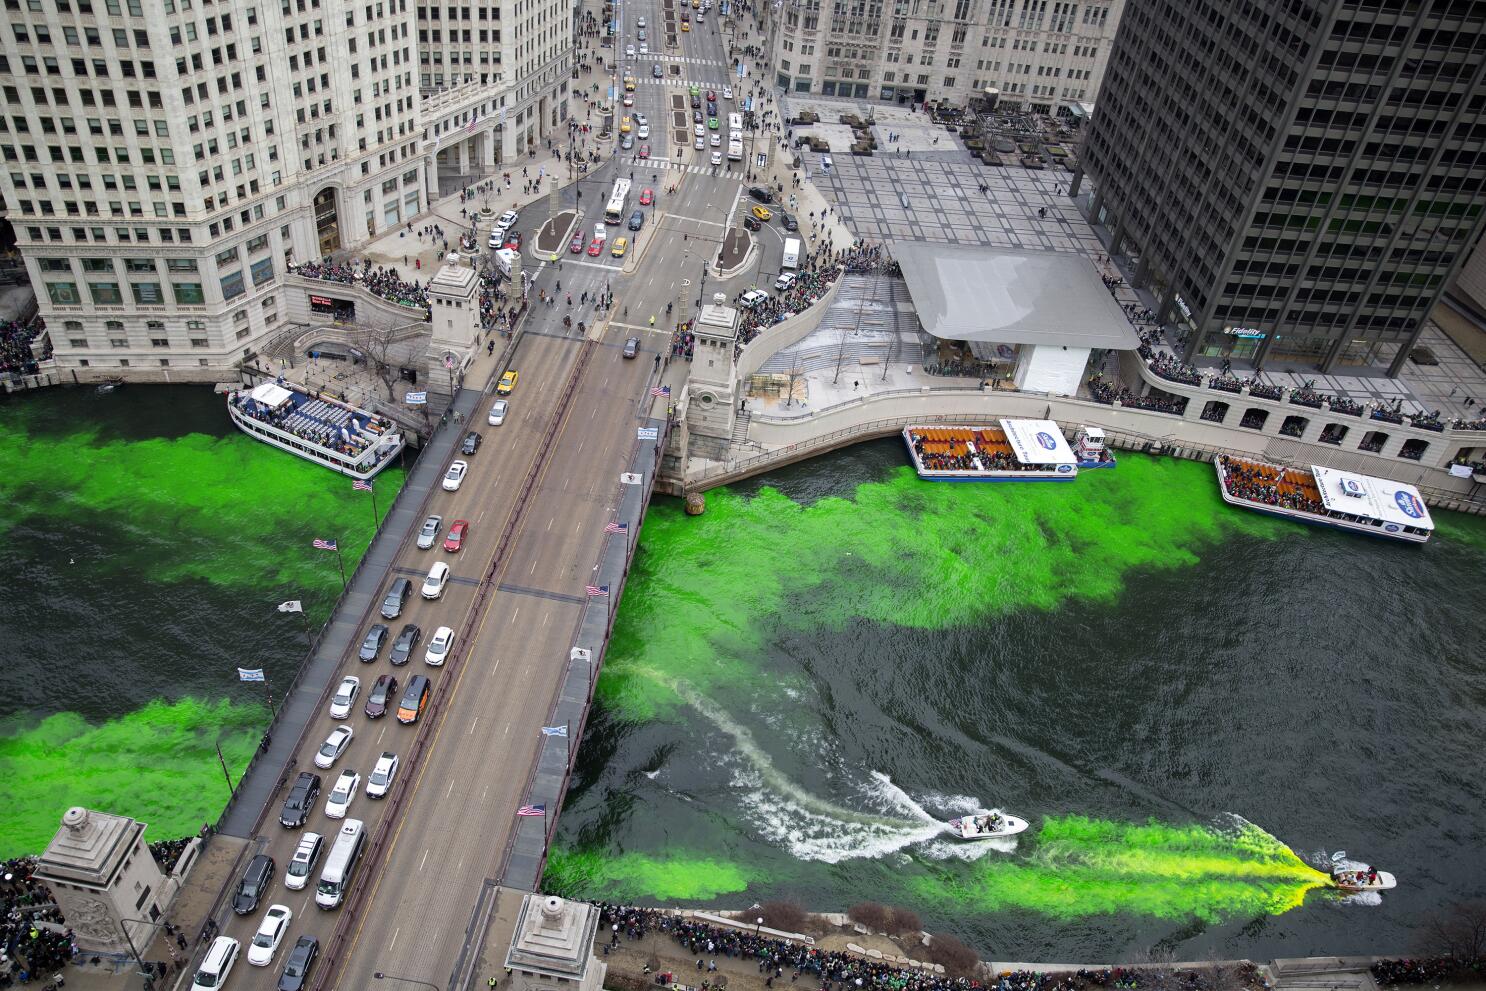 Chicago cancels St. Patrick's parade due to virus